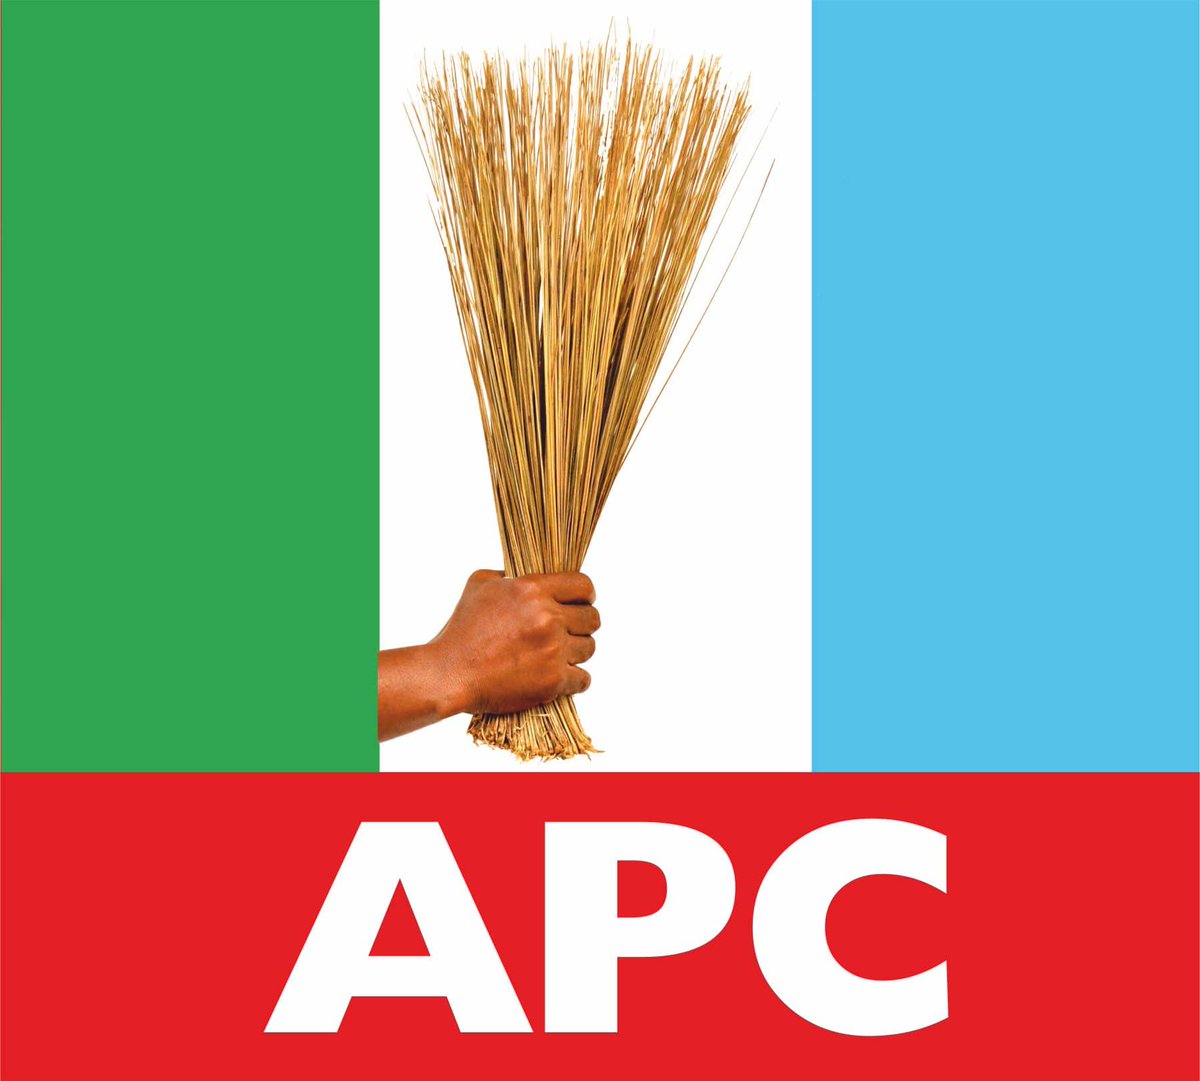 APC leaders say Buhari’s government has recovered close to one N1trn looted funds ”